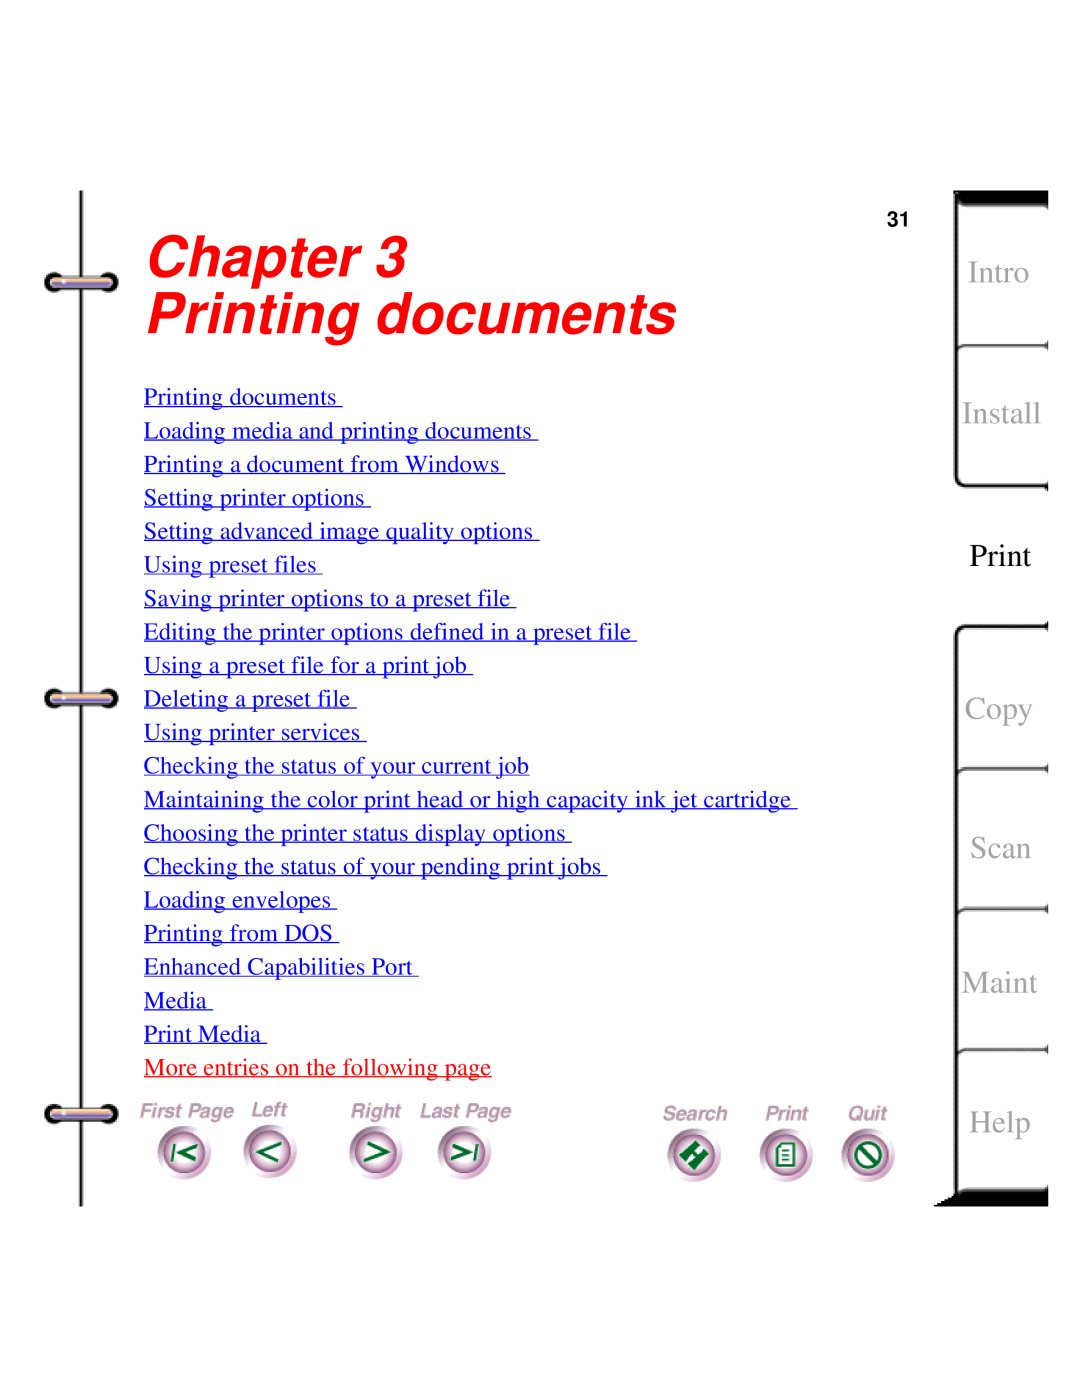 Xerox Document HomeCentre manual Chapter Printing documents, Intro Install, Copy Scan Maint, Help, Setting printer options 